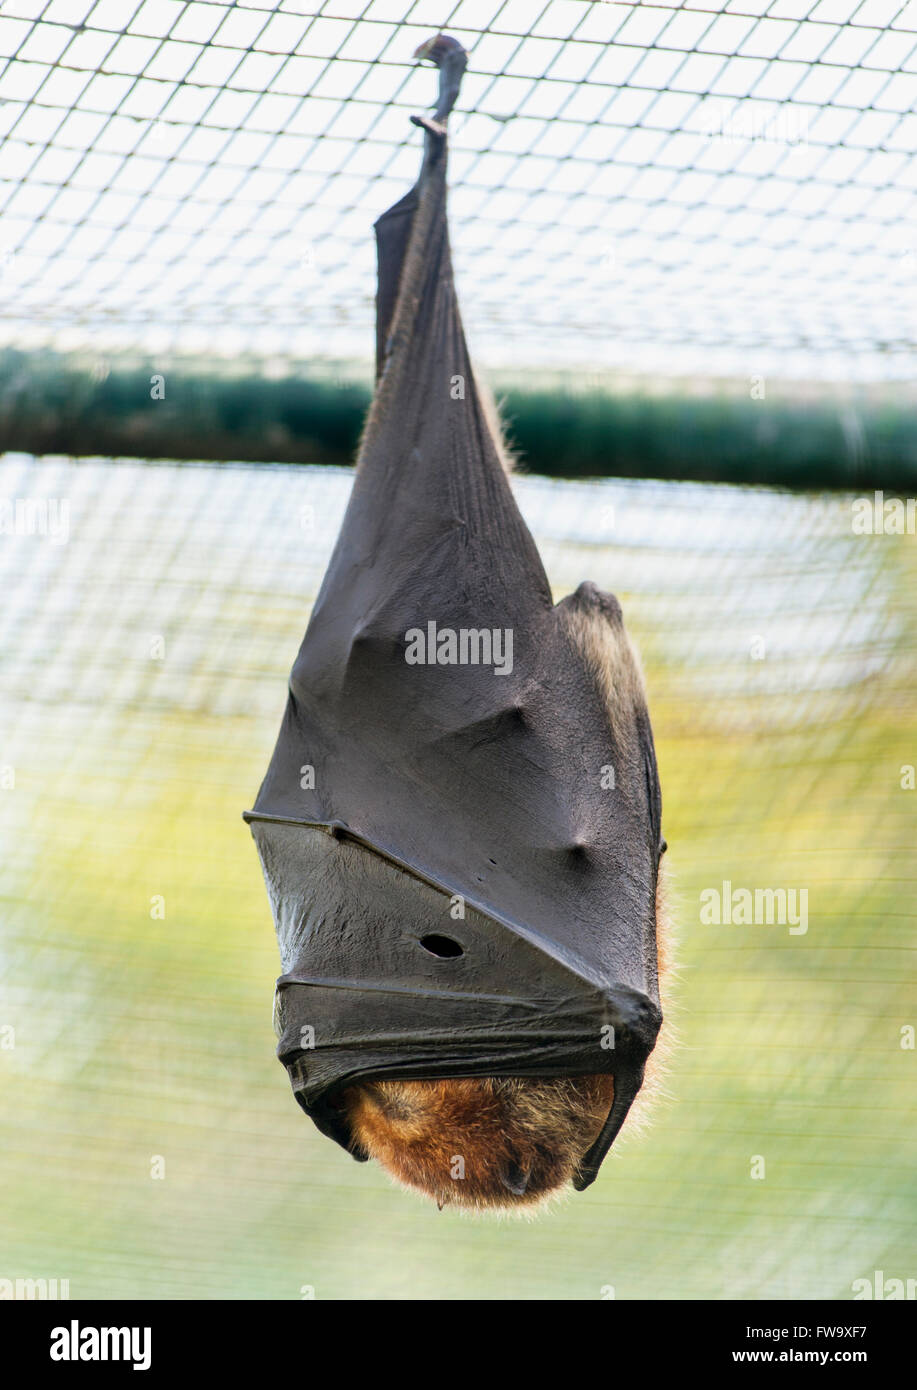 Bat roosting on the islet of Ile Aux Aigrettes in Mauritius. Stock Photo